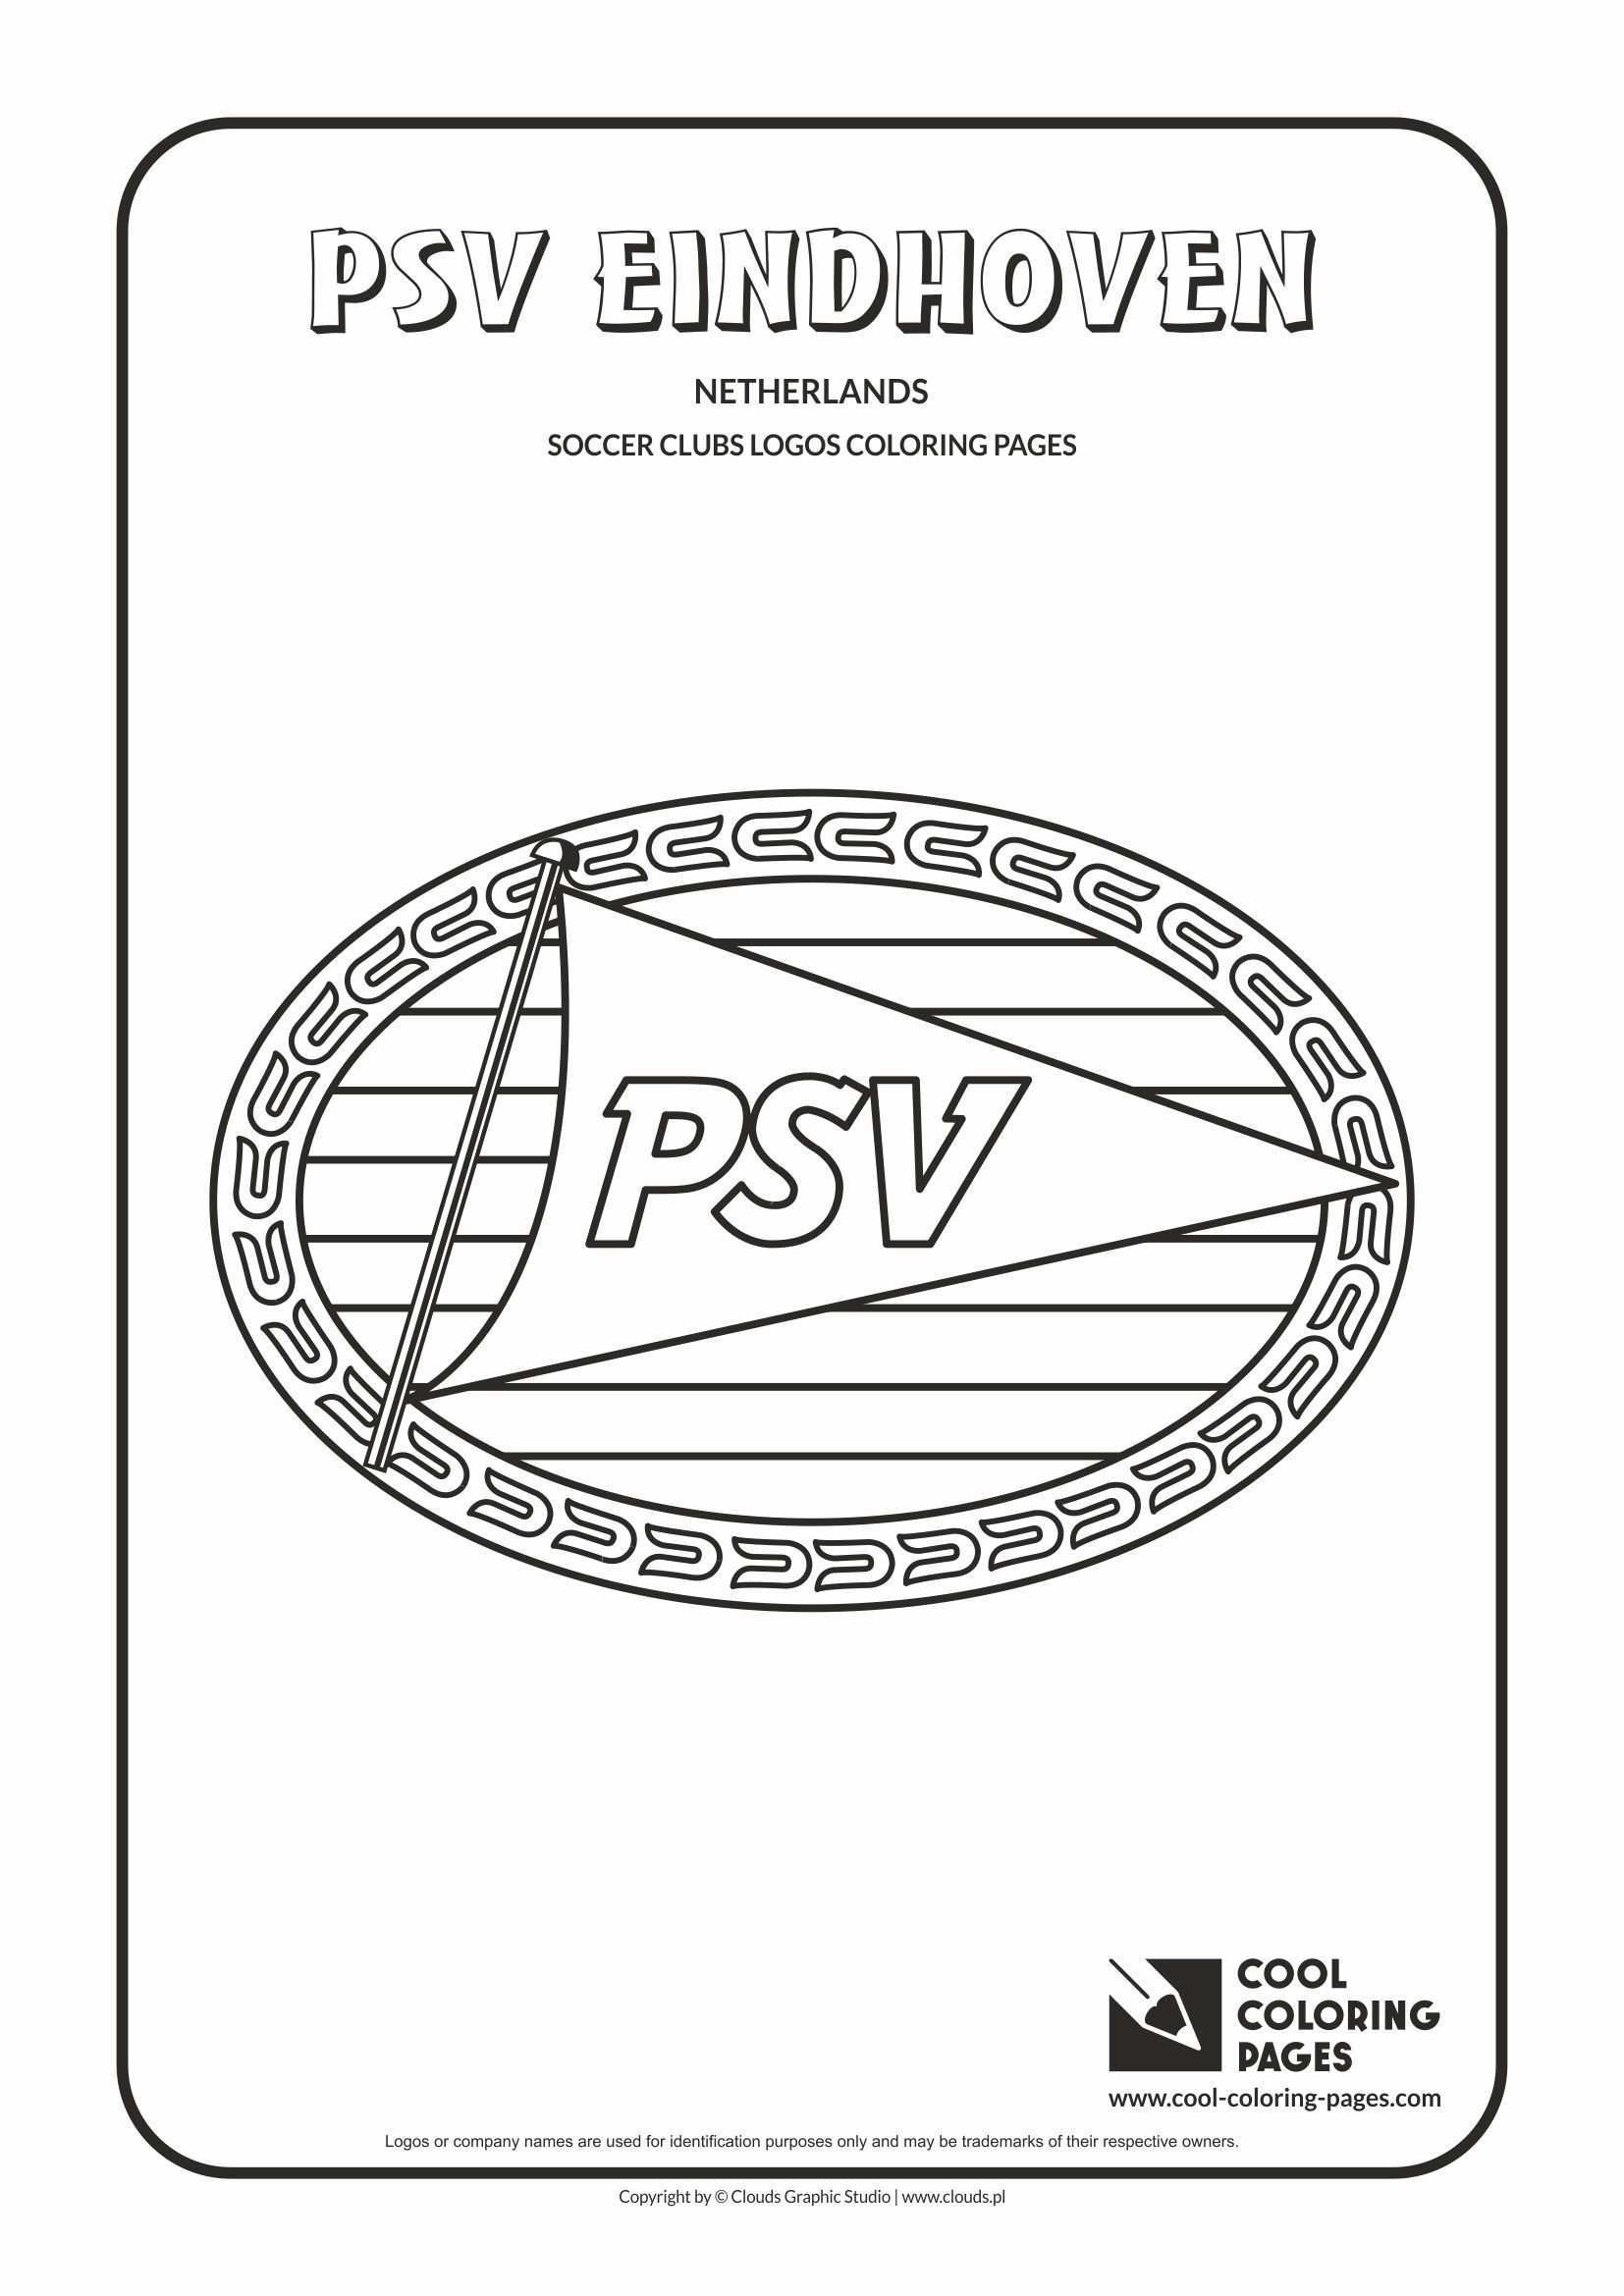 Psv Eindhoven Logo Coloring Page Cool Coloring Pages Coloring Pages Logos